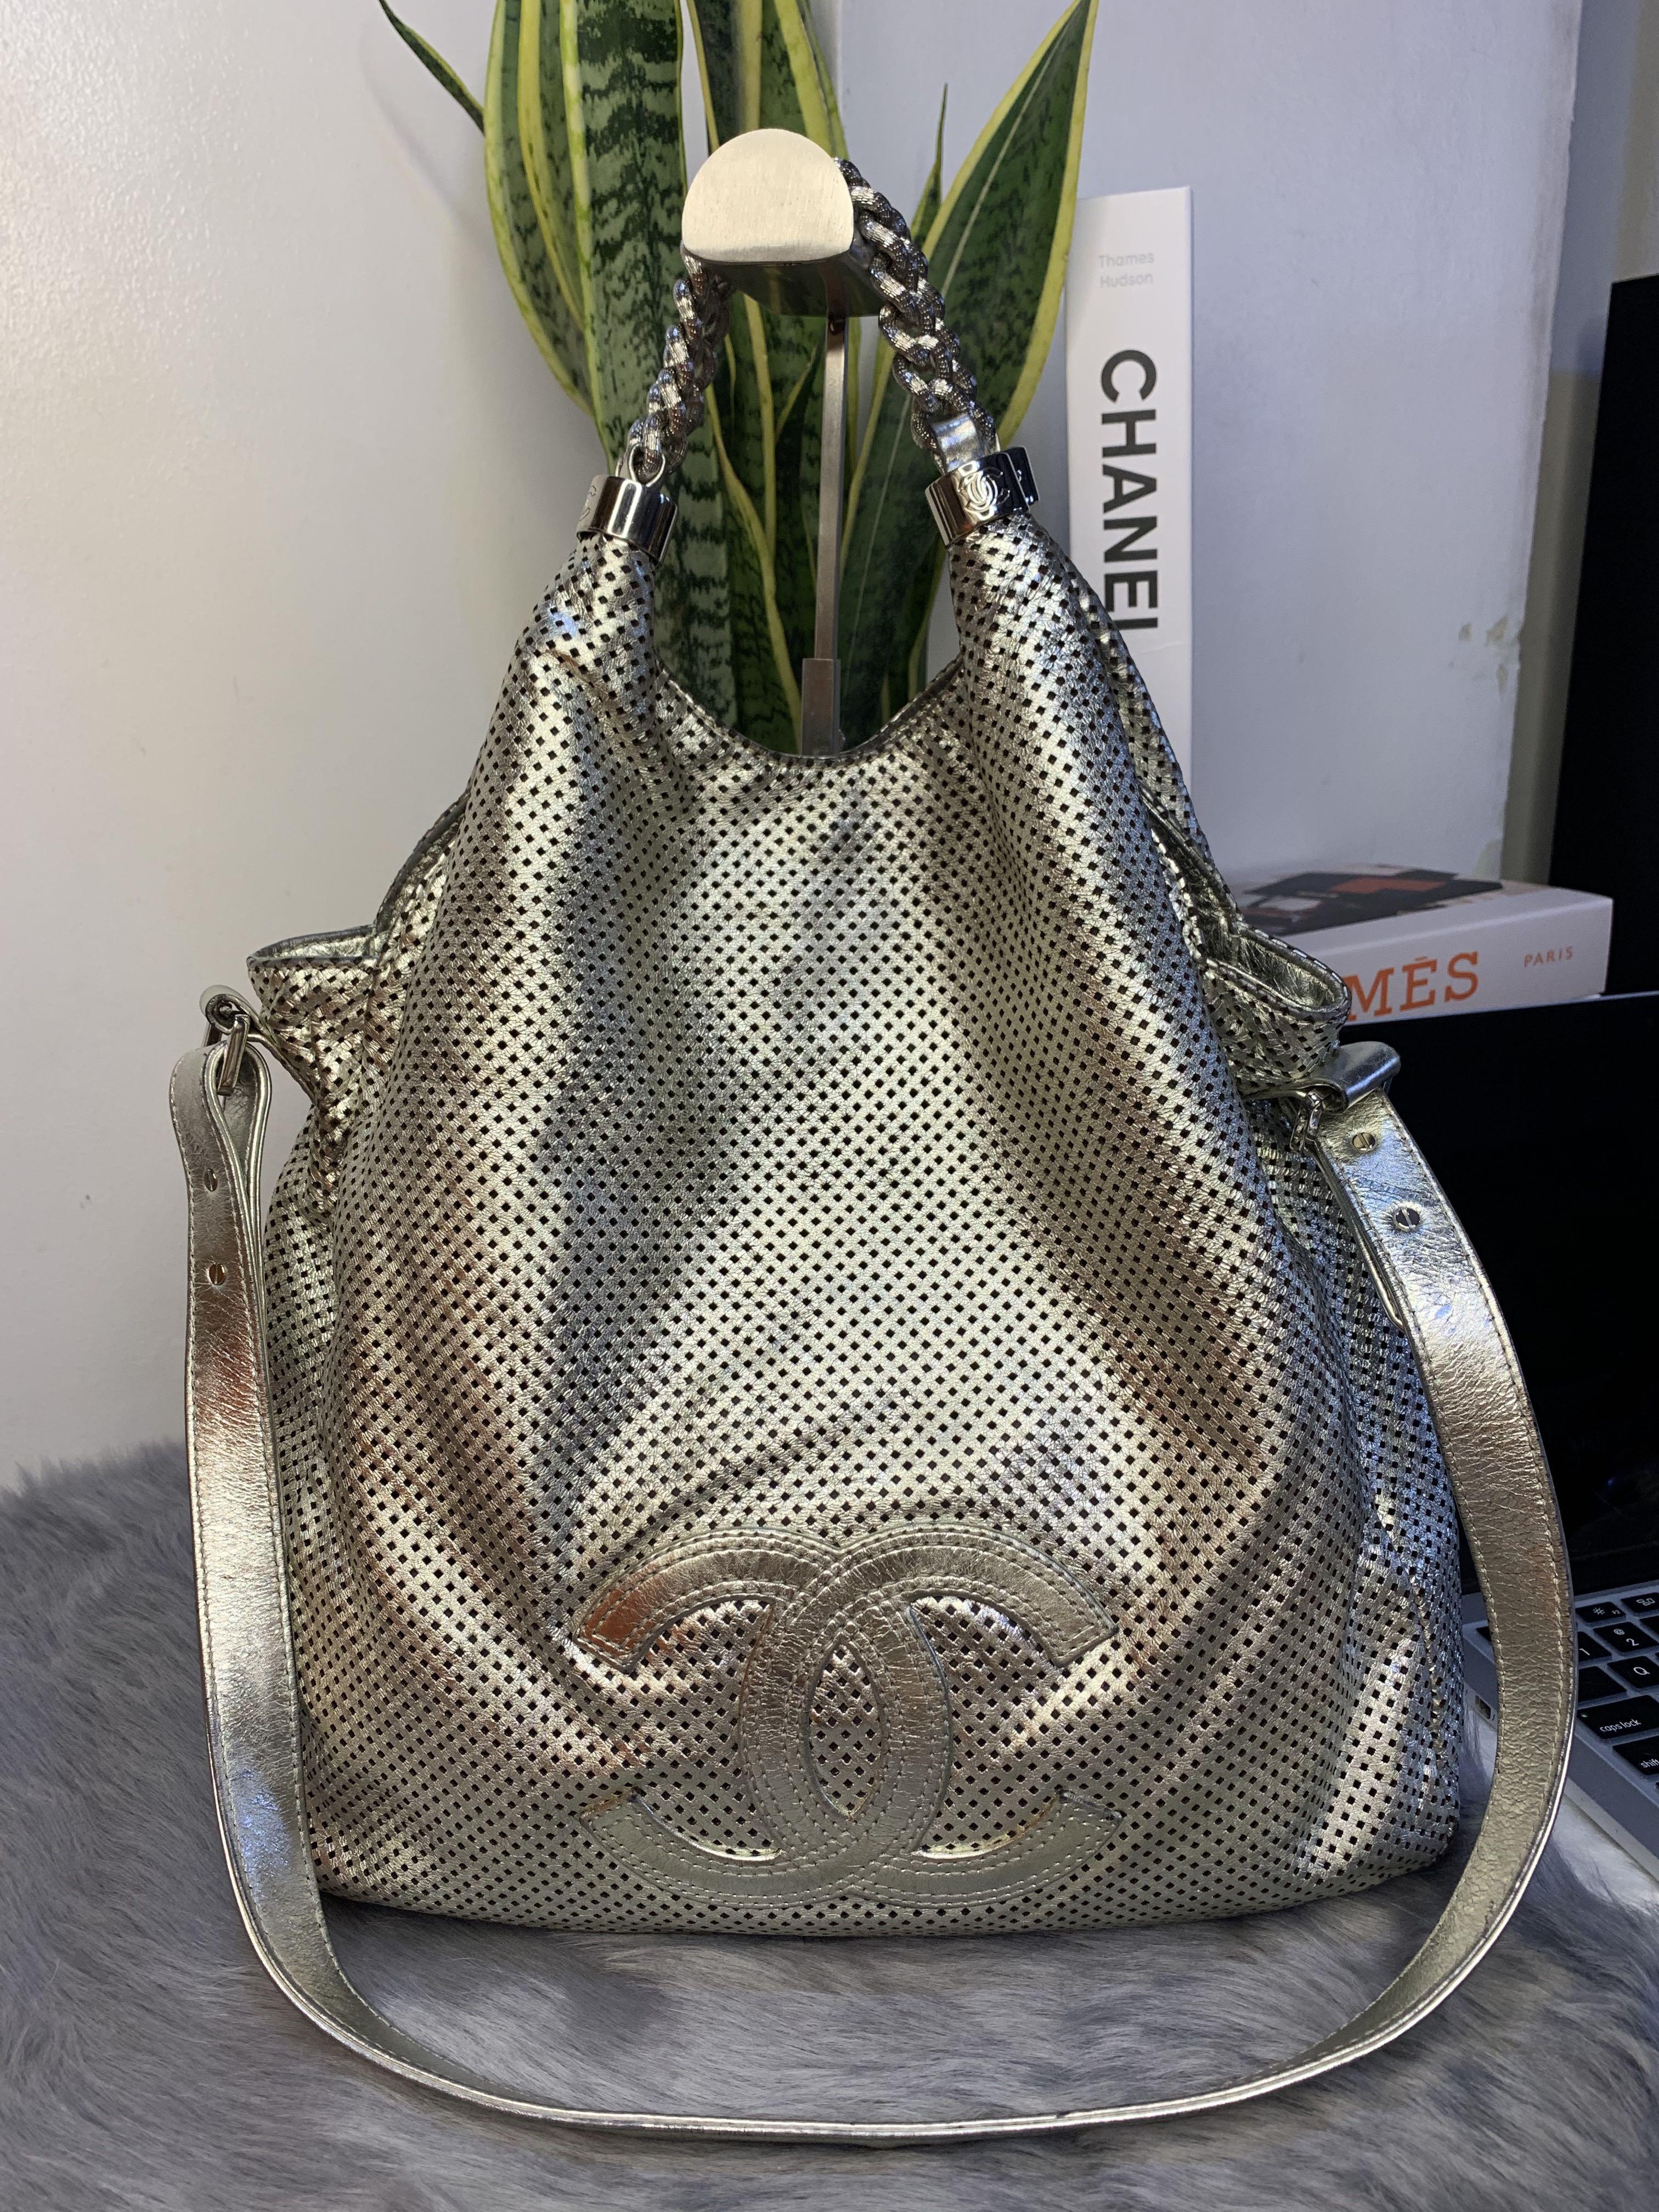 Chanel Perforated Rodeo Drive Hobo Bag